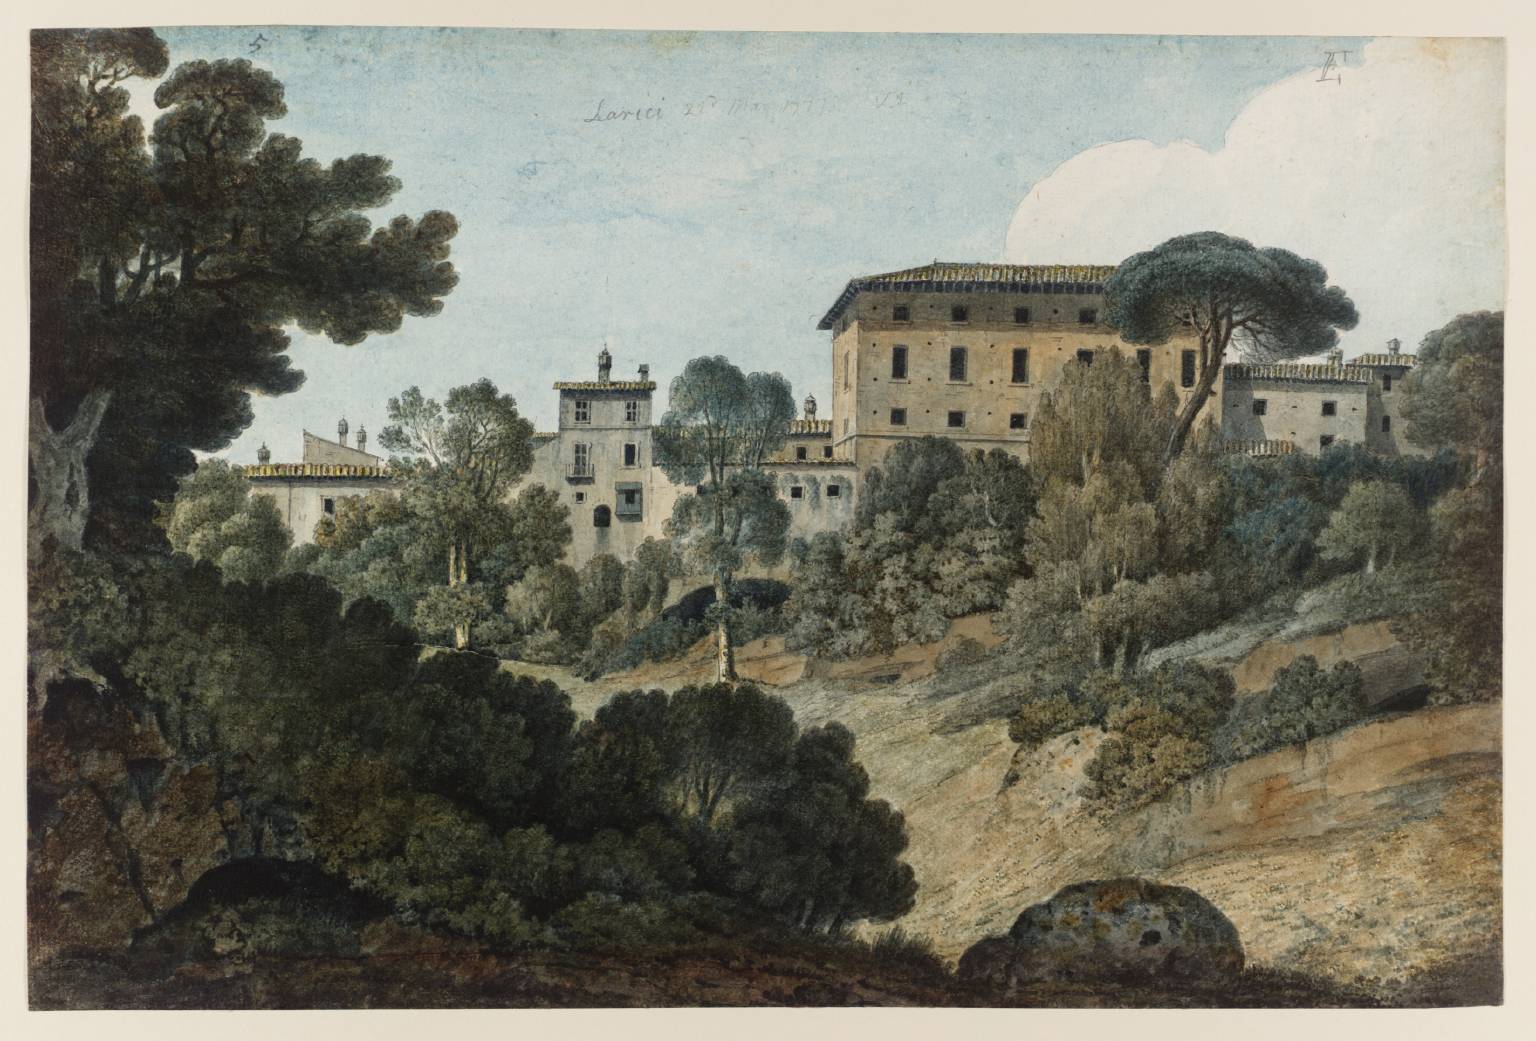 T08141: Ariccia, Buildings on the Edge of the Town. Verso: Relative Positions of the Benedictine Convent of the Madona of the Galoro near Larici and the Gardens of the Convent of the Capuchins at Albano as Well as the Dome of the Church at L’Arriccia